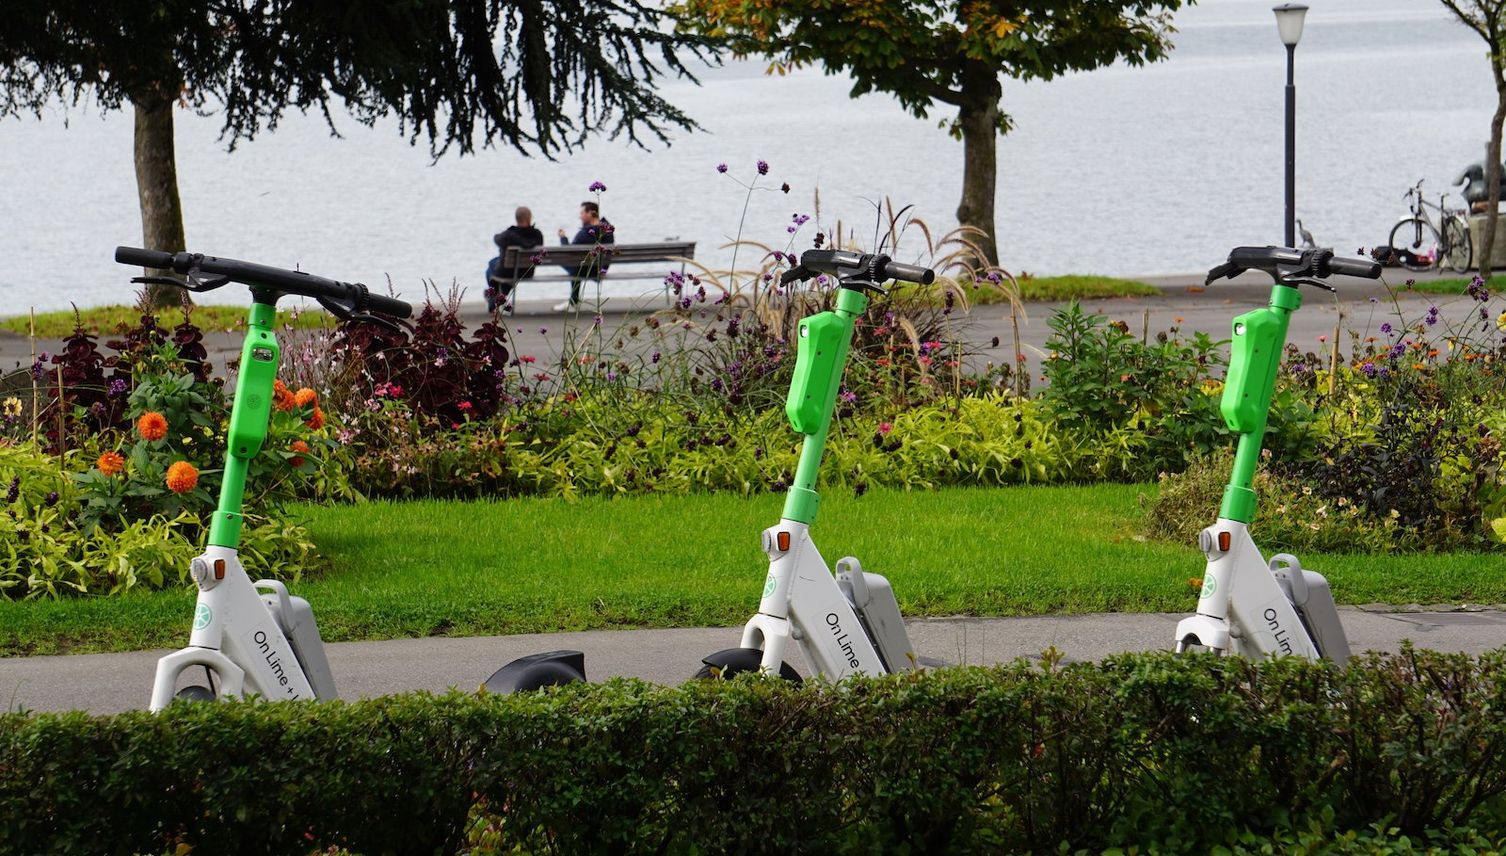 Stadt Zug will 200 neue E-Scooter